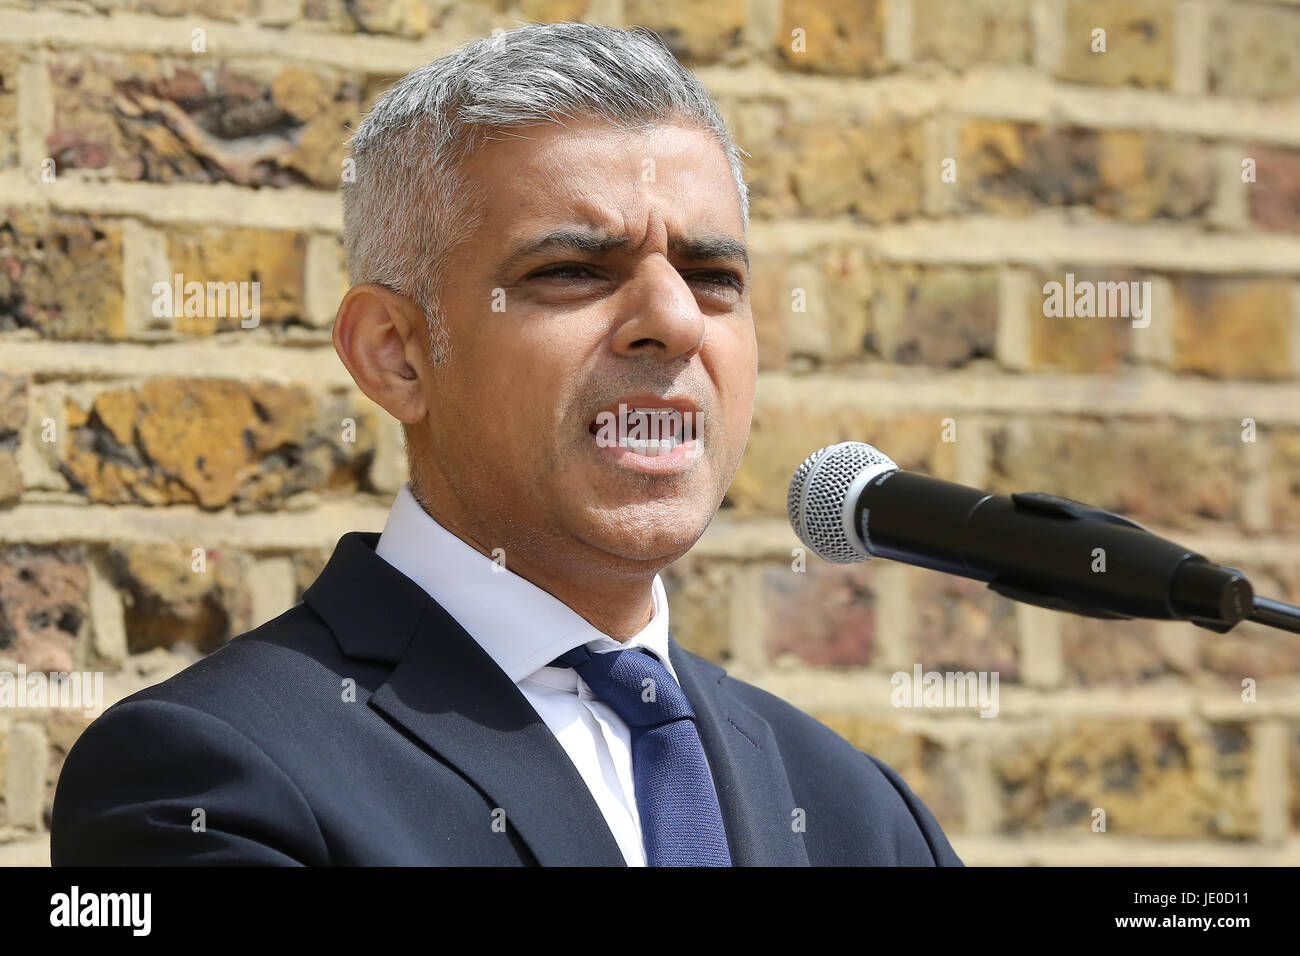 London, UK. 22nd Jun, 2017. The Mayor of London, Sadiq Khan. A memorial honoring the two million African and Caribbean military servicemen and women who served in World War I and World War II, is unveiled in Windrush Square, Brixton, South London. The event attended by war veterans, in-service men and women and dignitaries including the Mayor of London Sadiq Khan, High Commissioners from Commonwealth Nations, and the Secretary of State for Defence Sir Michael Fallon. Credit: Dinendra Haria/Alamy Live News Stock Photo